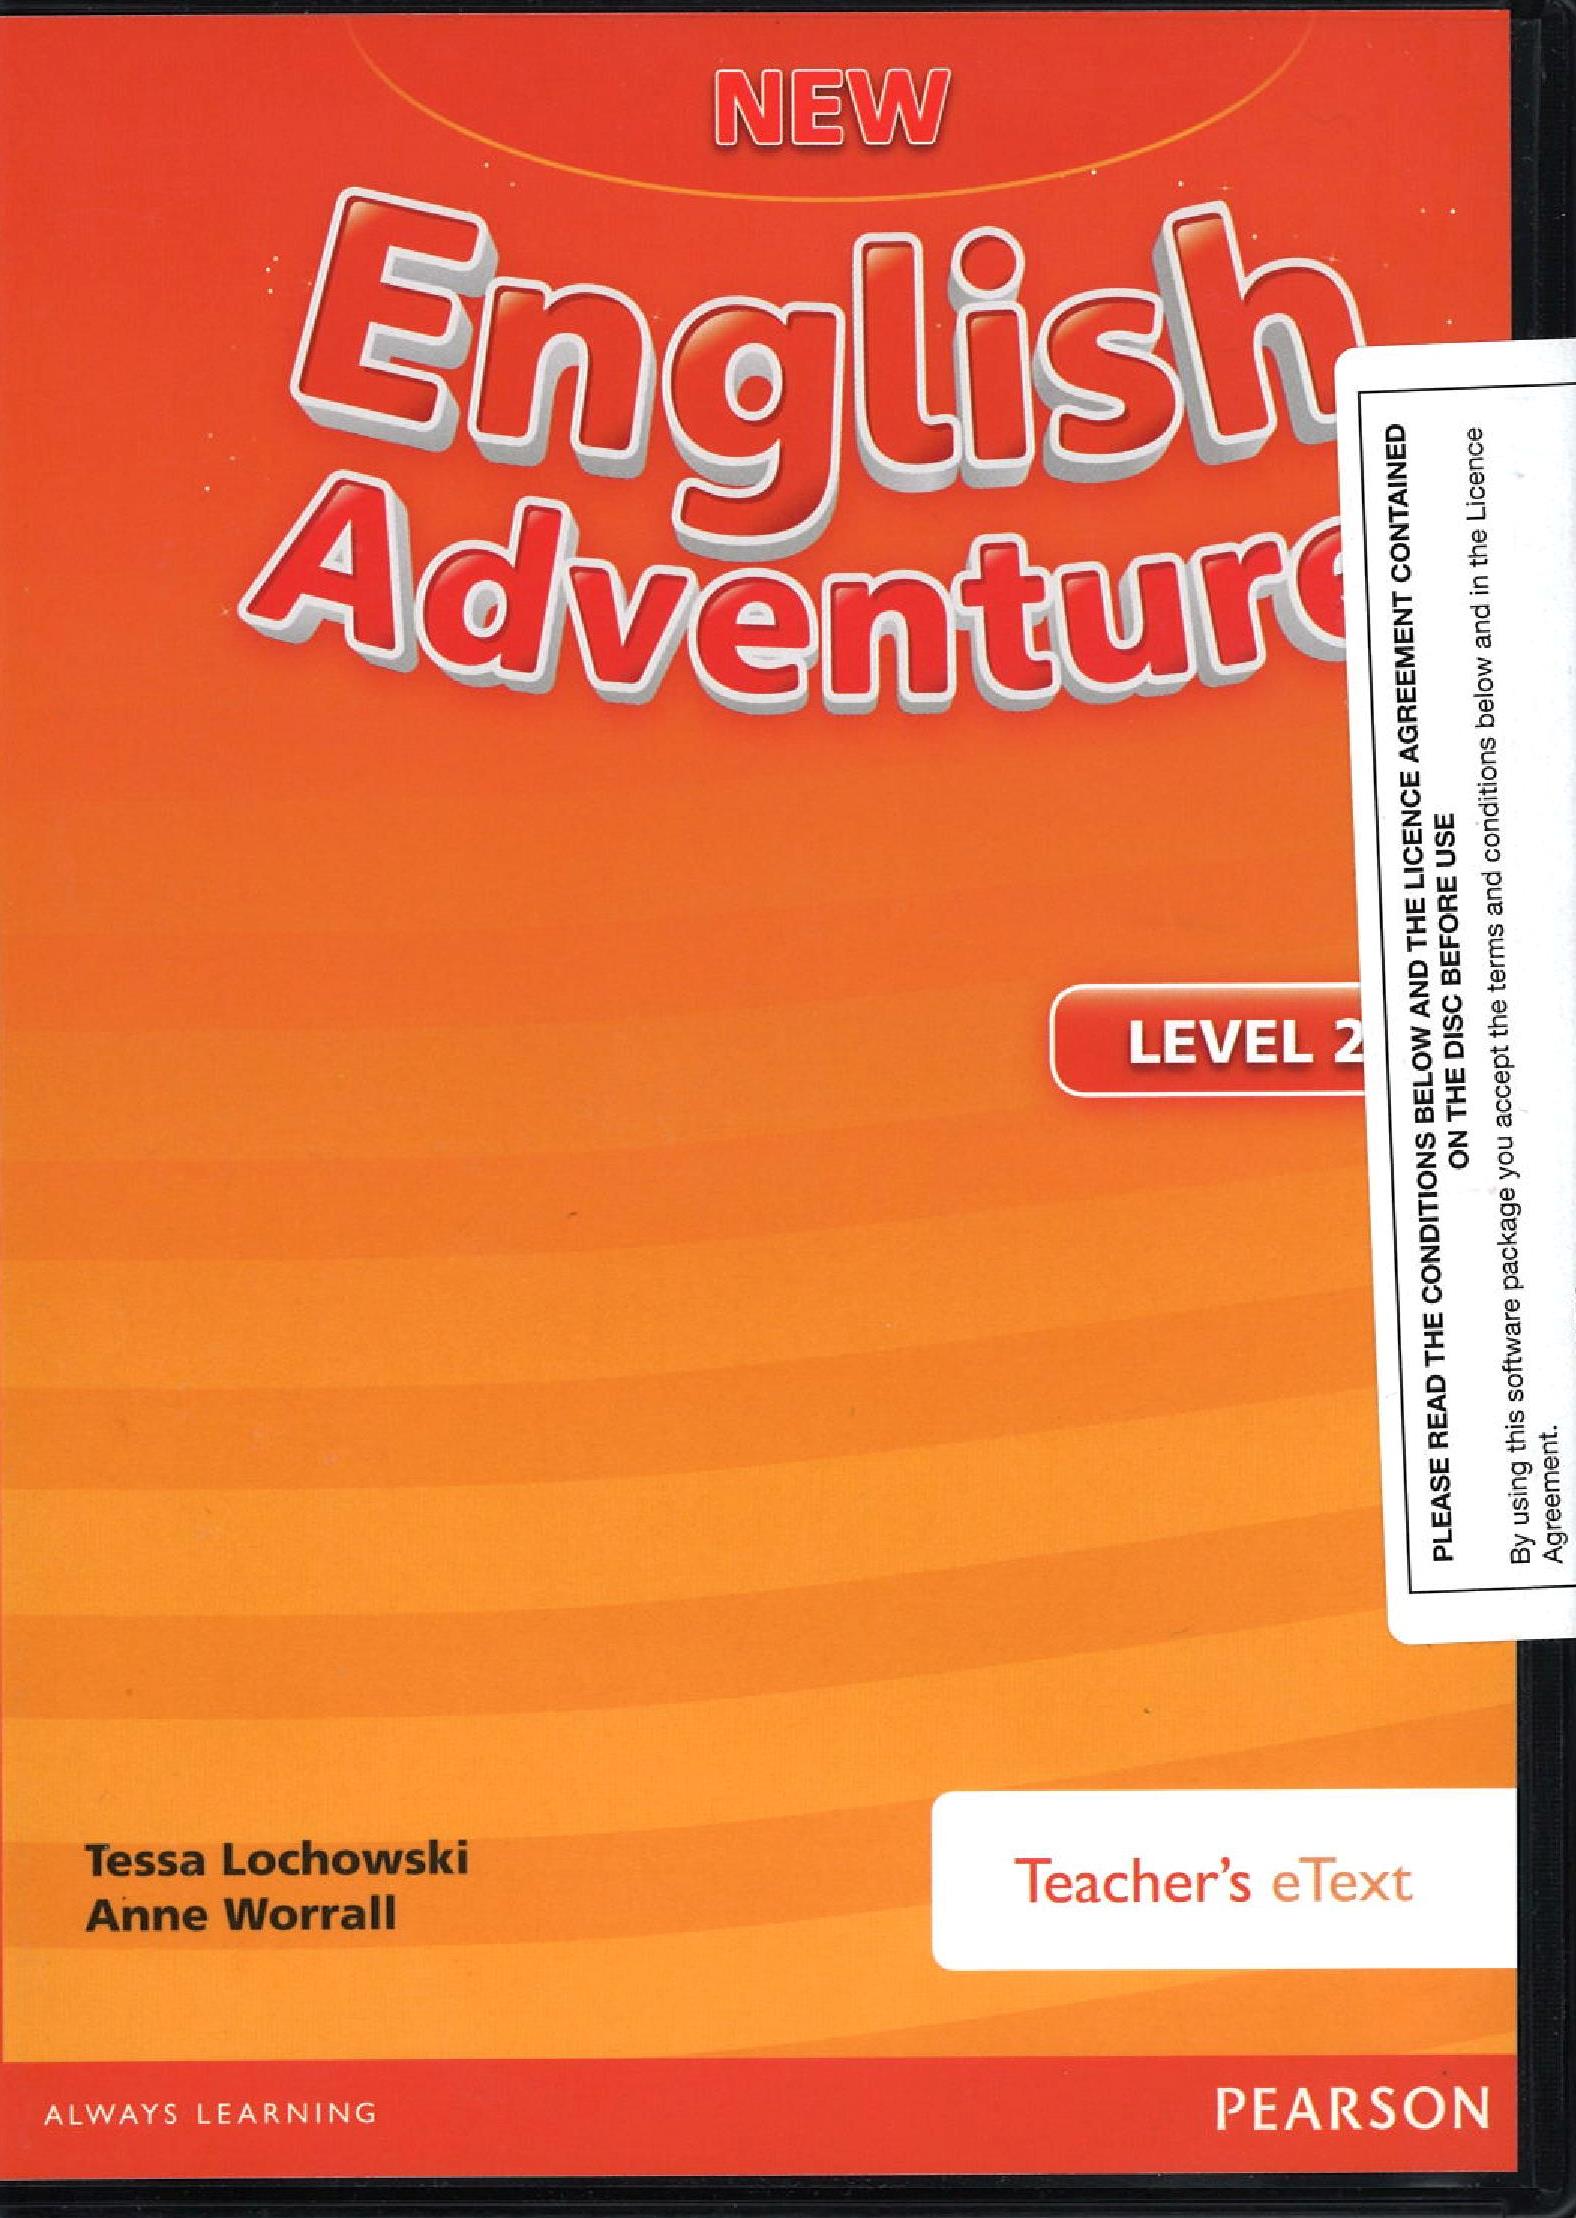 New English Adventure 2 My Body And Face New English Adventure 2 Active Teach Software | 9781447949008 | Pearson